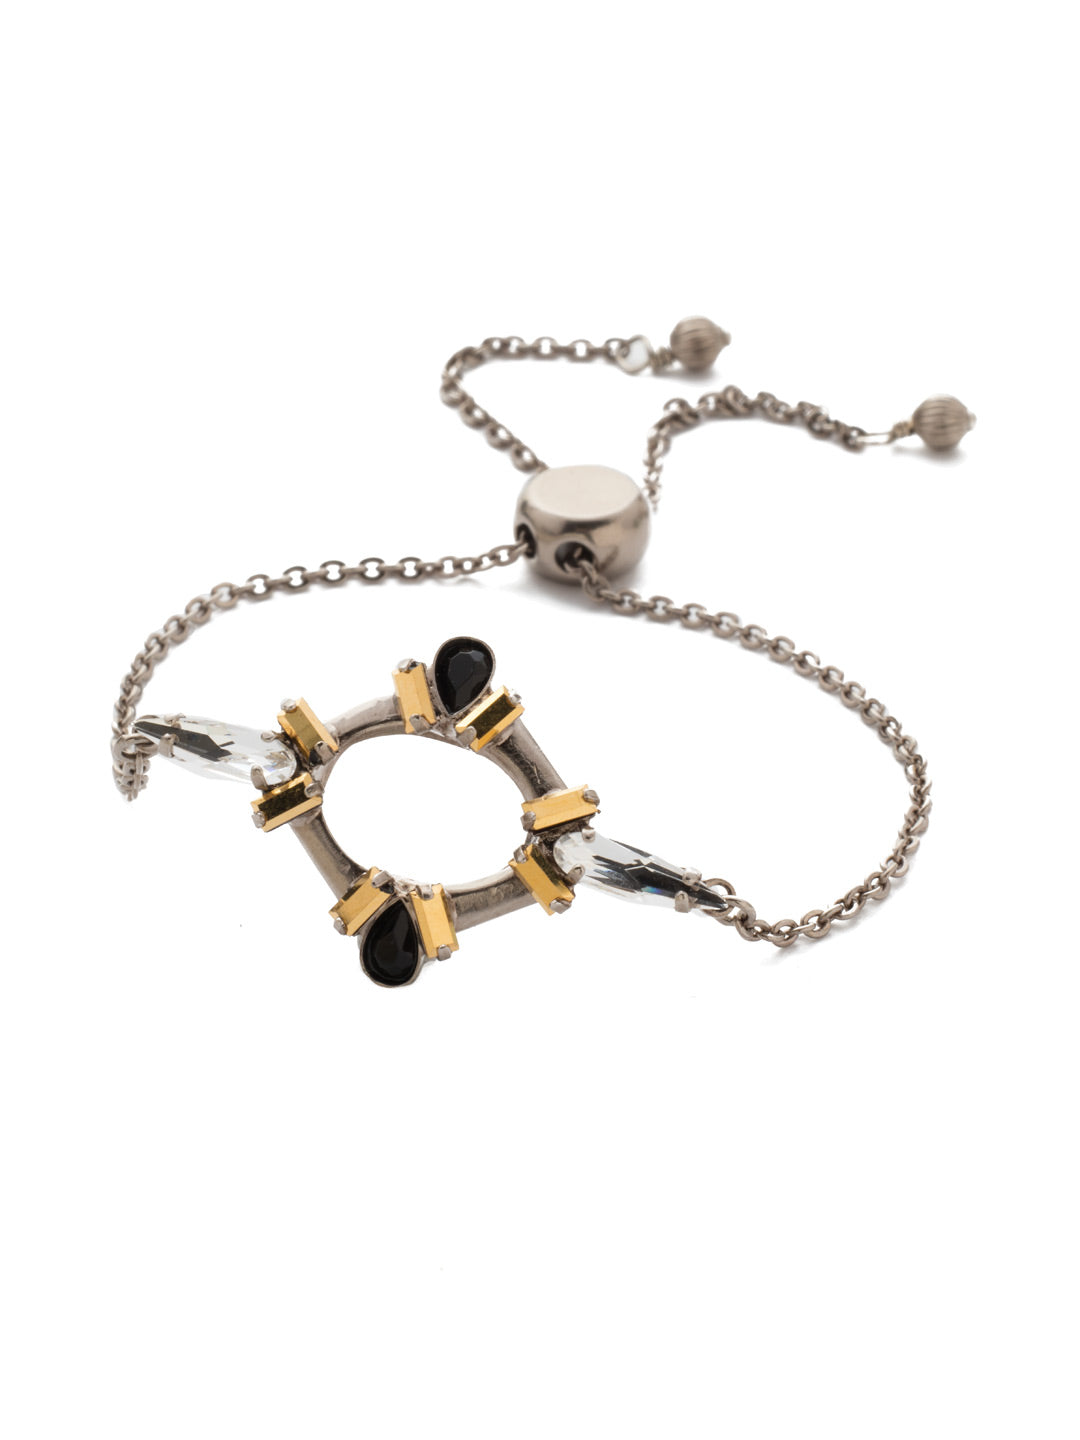 Nevaeh Adjustable Slider Bracelet - BEA23ASHMT - <p>A modern yet elegant center piece design adorned with a variety of crystals centers this slider bracelet, which can be easily adjusted to your desired fit. Perfect to pair with other bracelets or to wear alone. From Sorrelli's Heavy Metal collection in our Antique Silver-tone finish.</p>